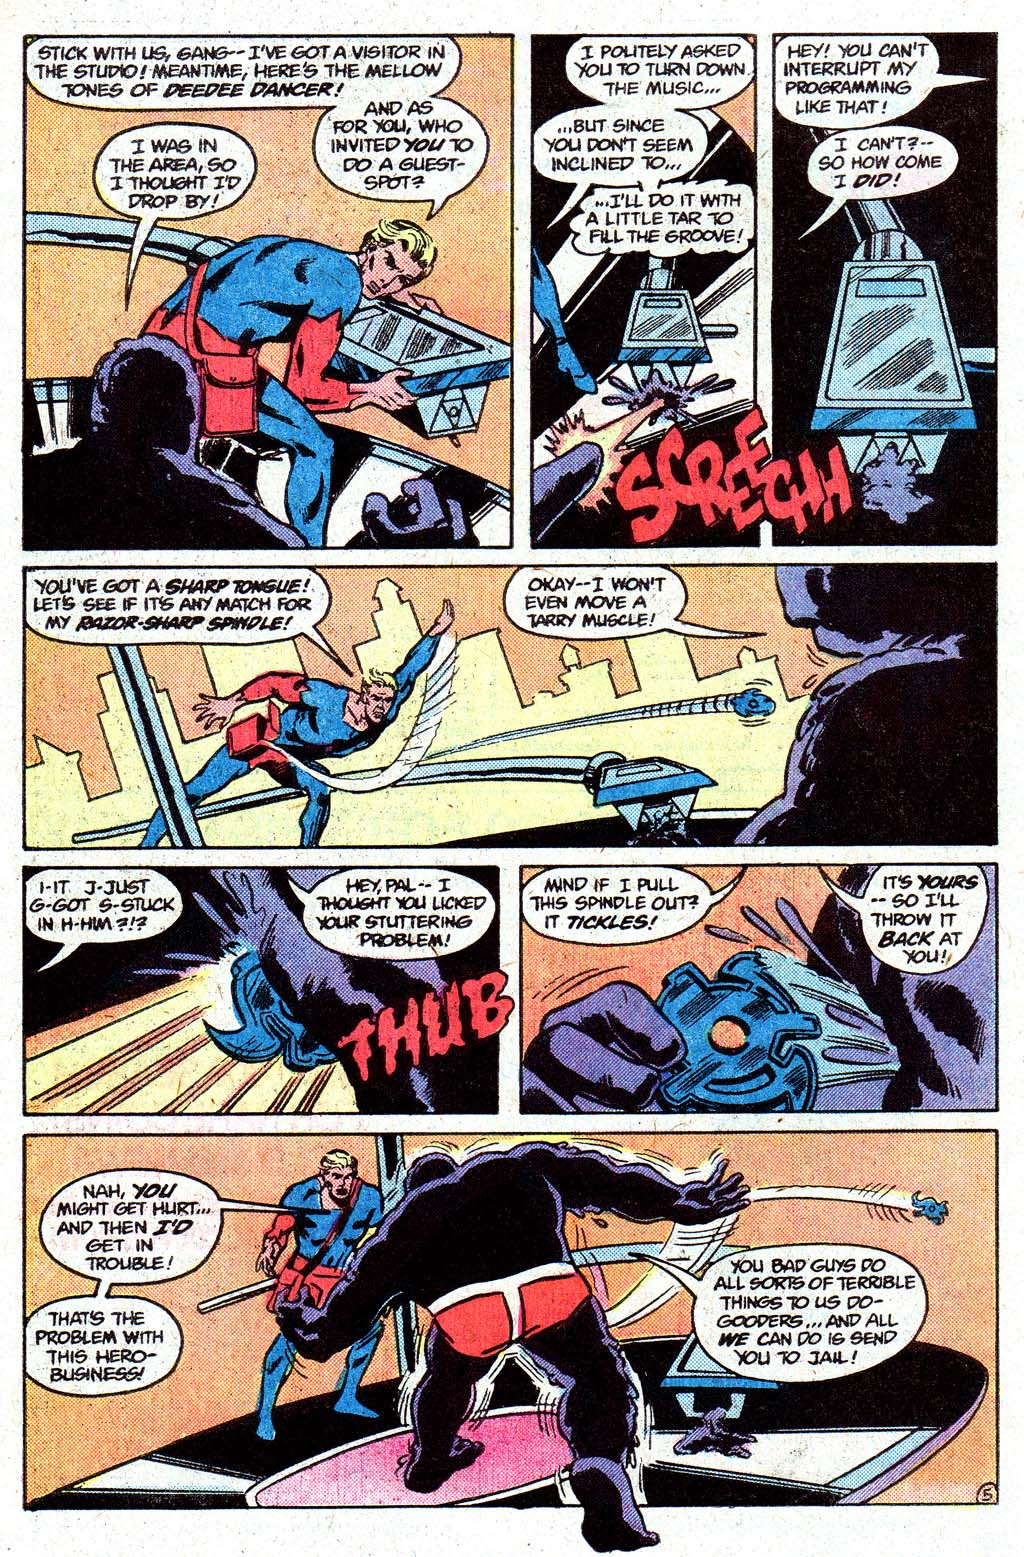 The New Adventures of Superboy 29 Page 29